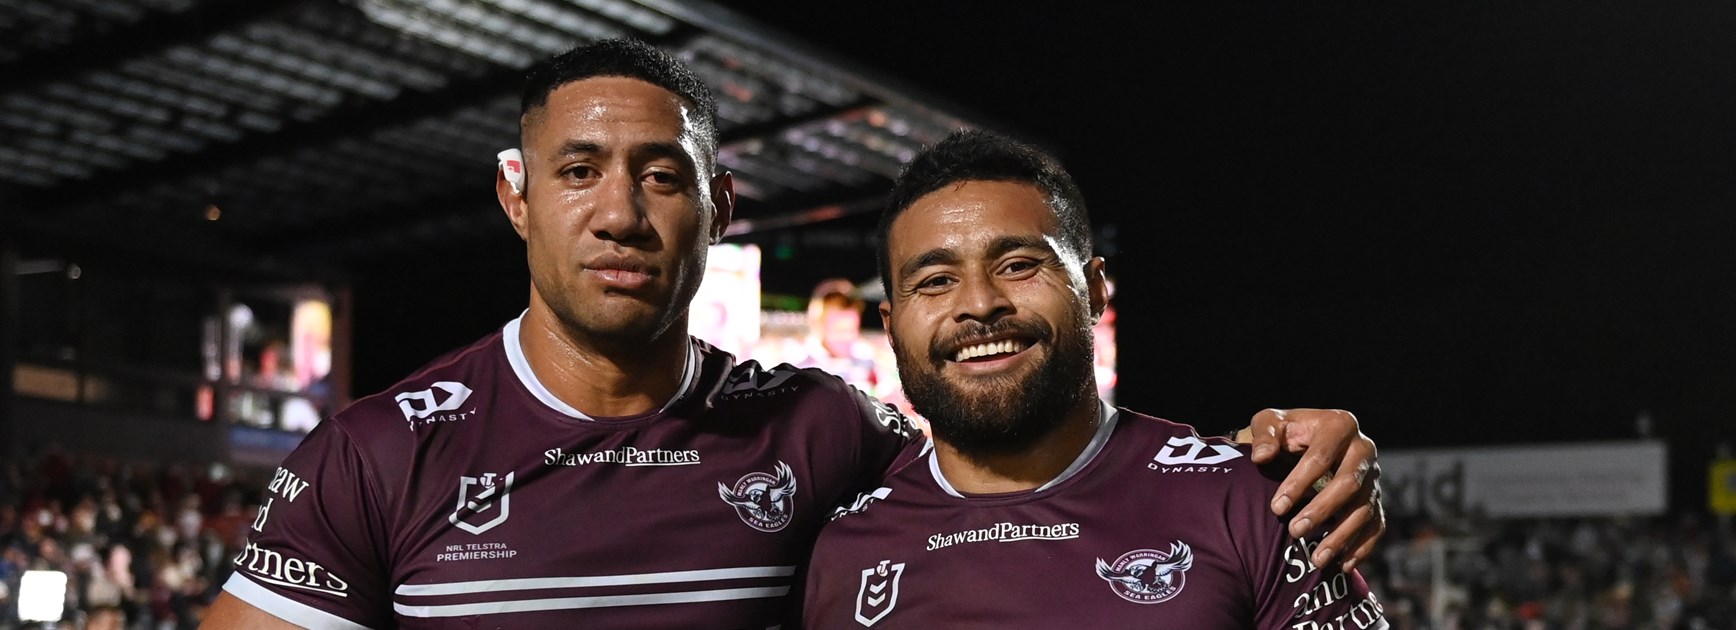 Meet Toff and Taniela at Rugby League Fan Fest